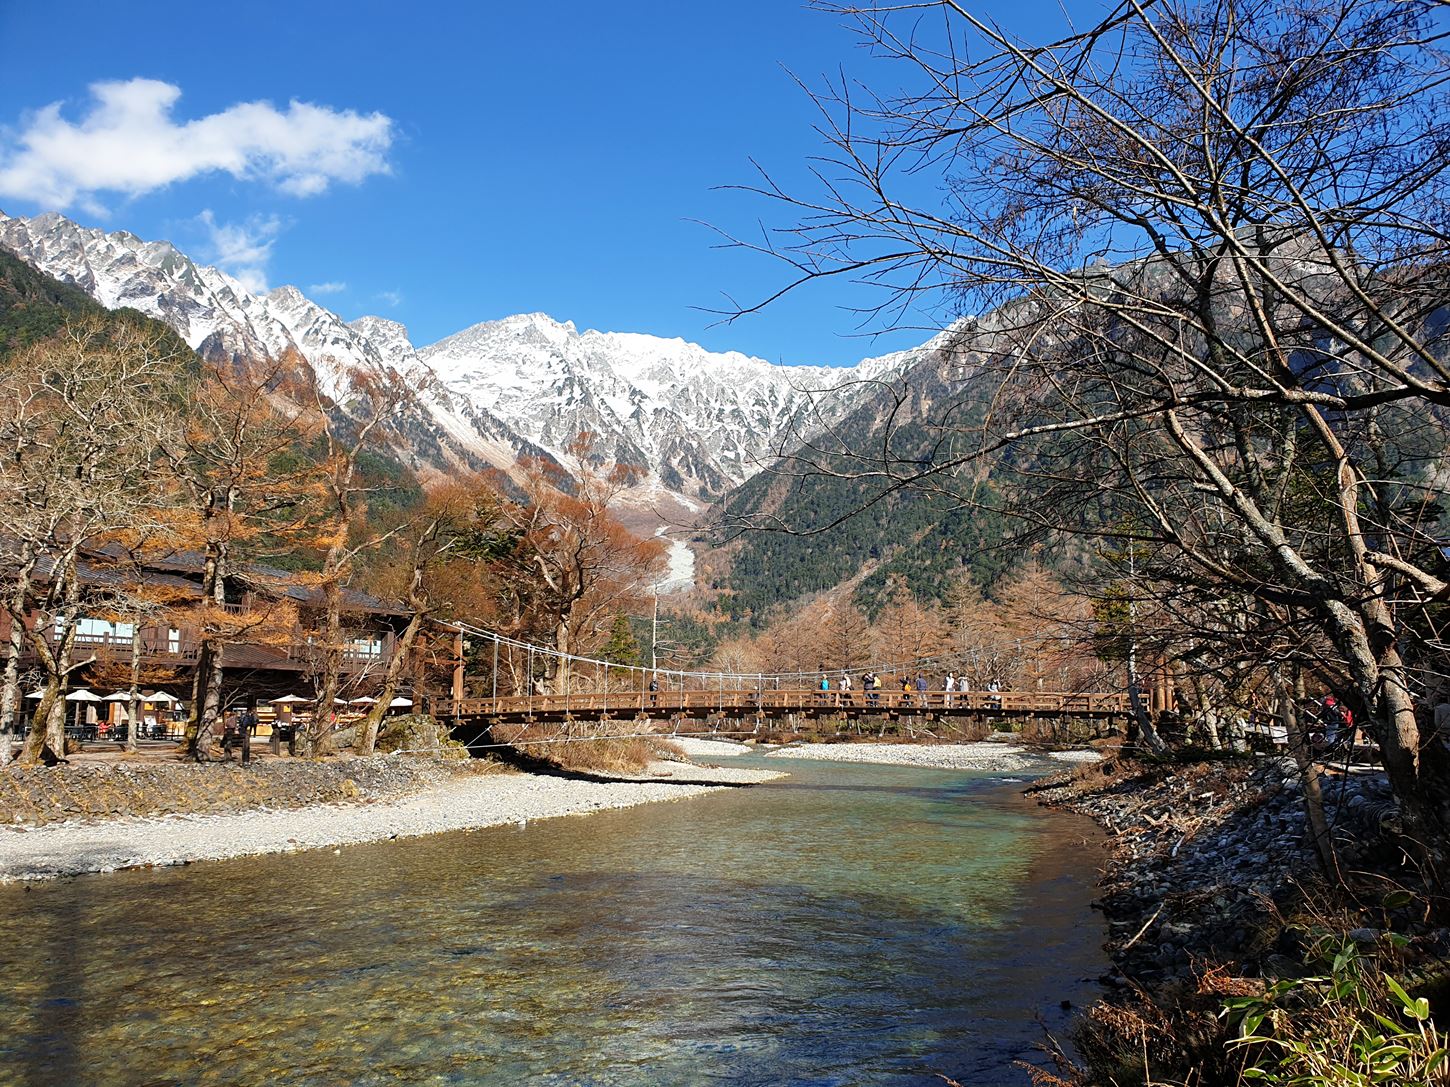 Sightseeing scenery that simply shows the weather in Nagano in November4